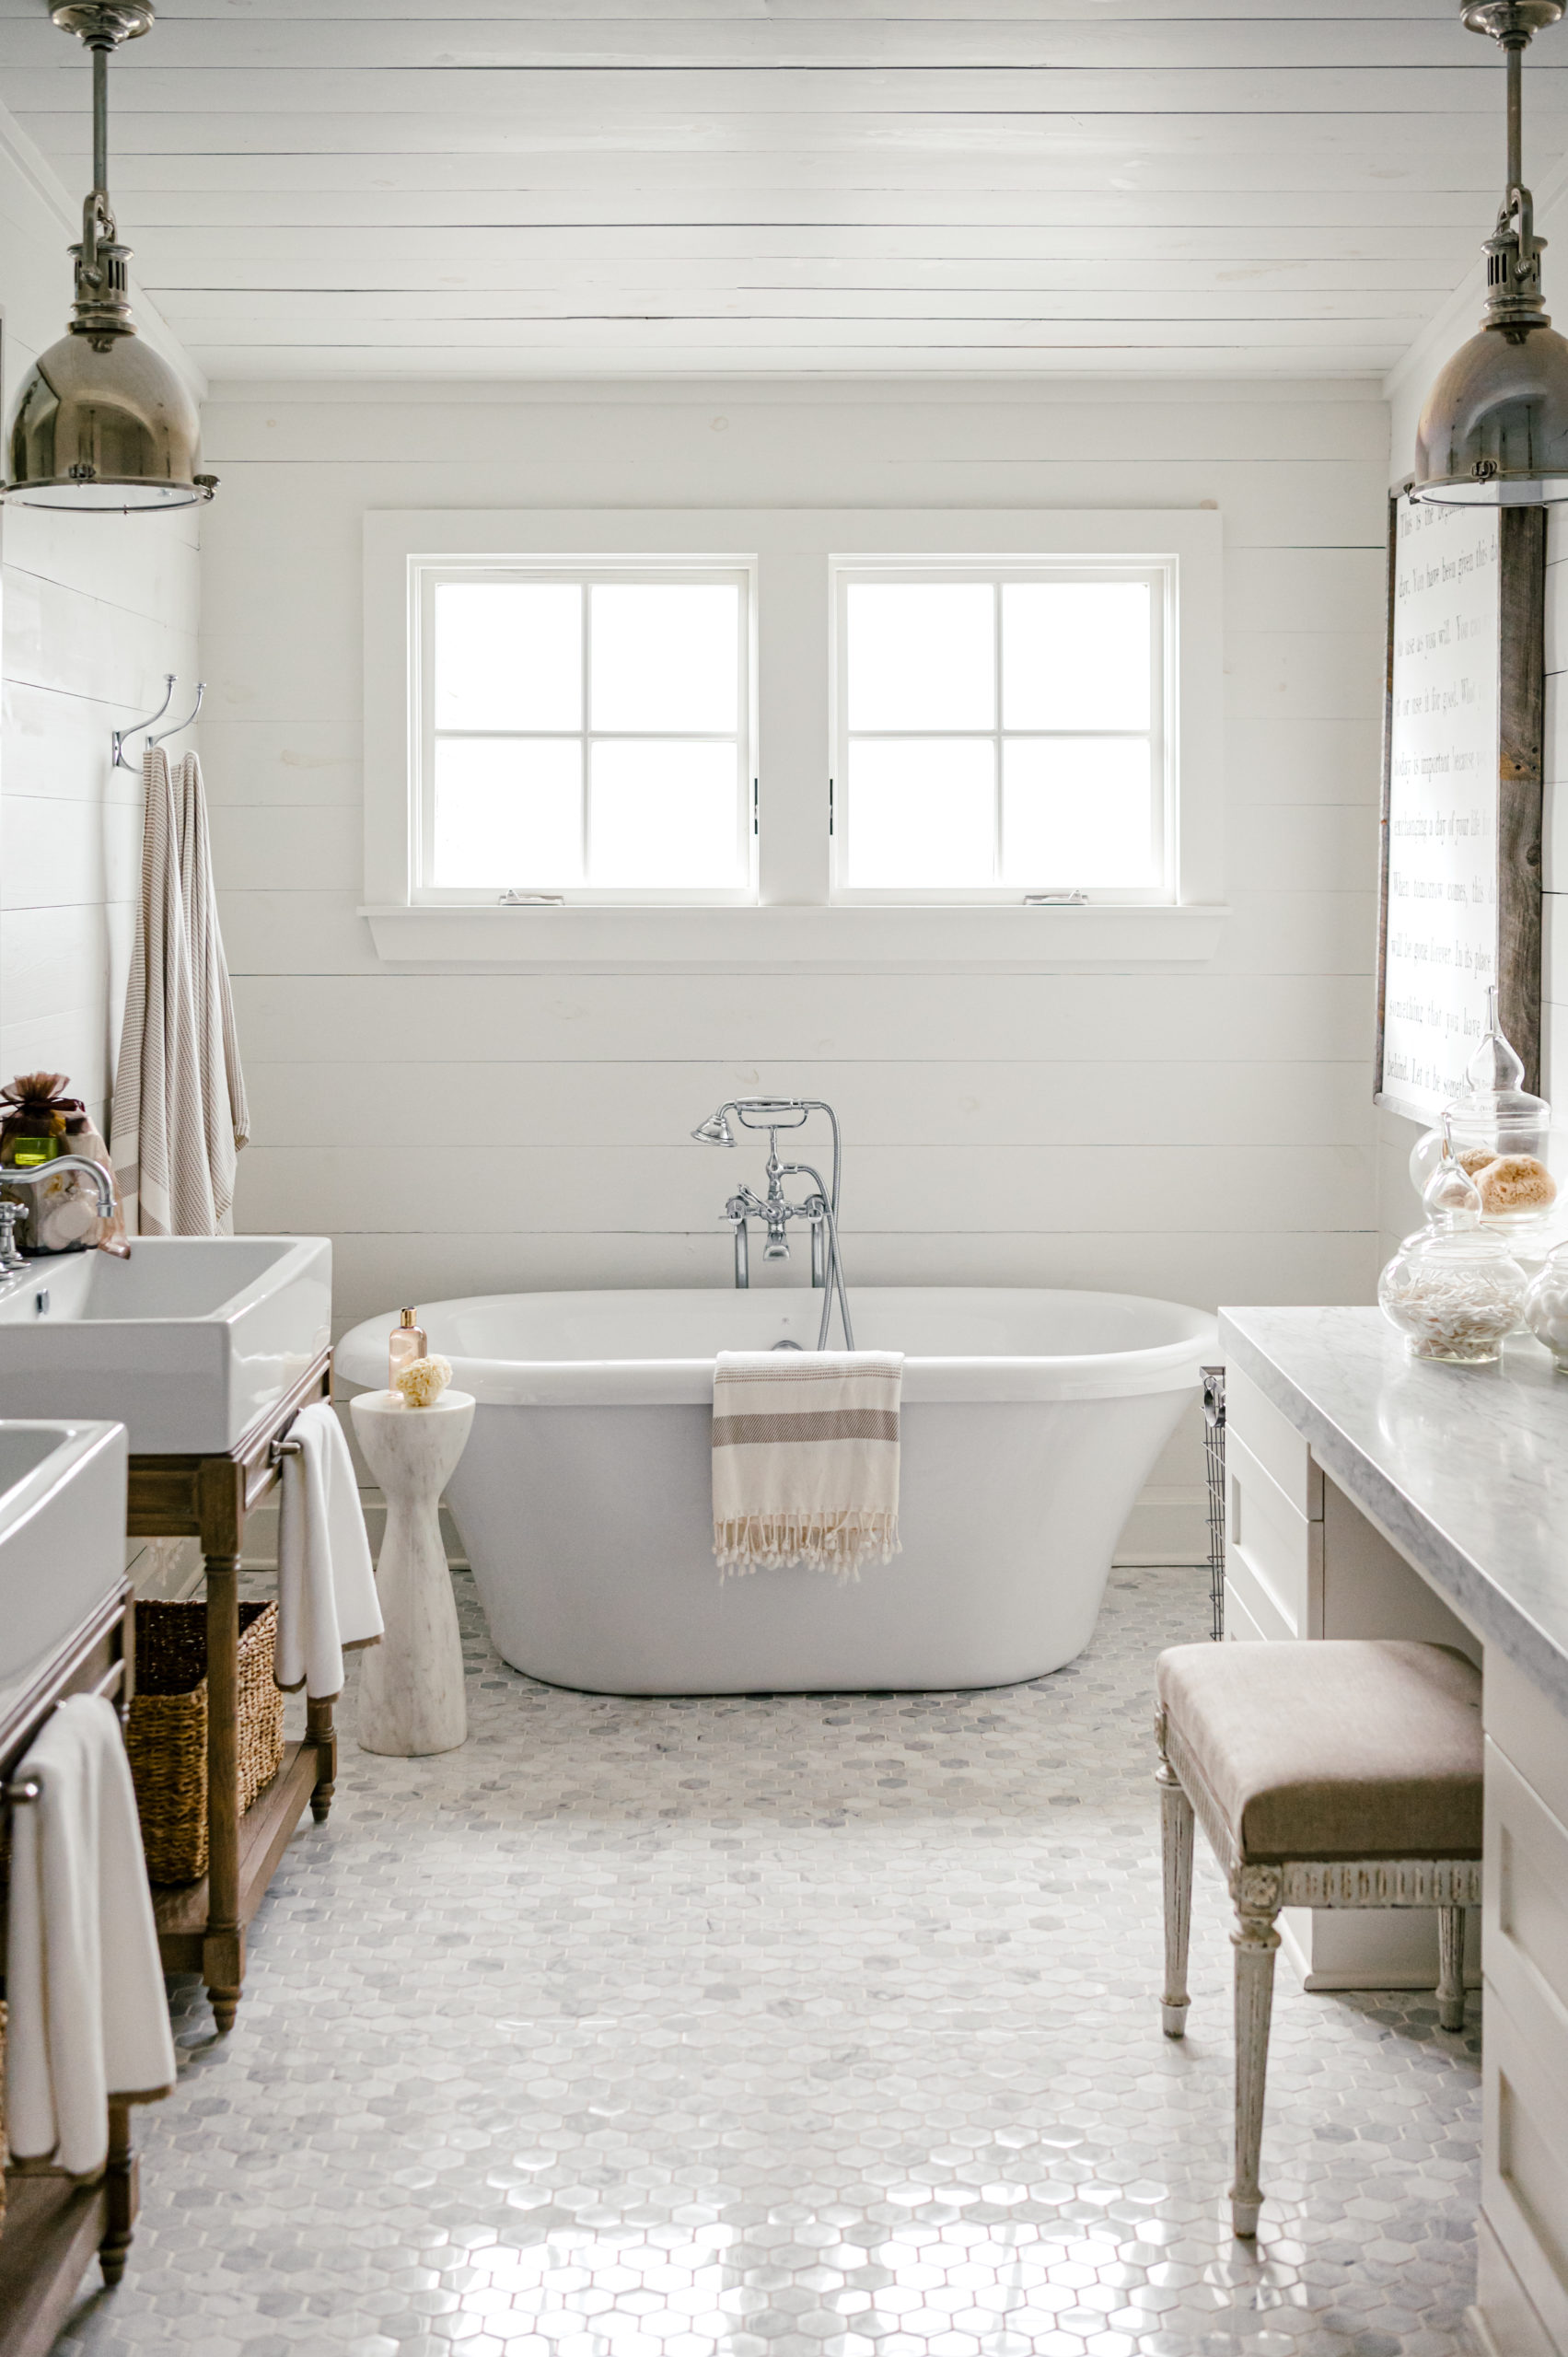 Interior photography of a beautiful white bathroom and a white Soaking Clawfoot Tub